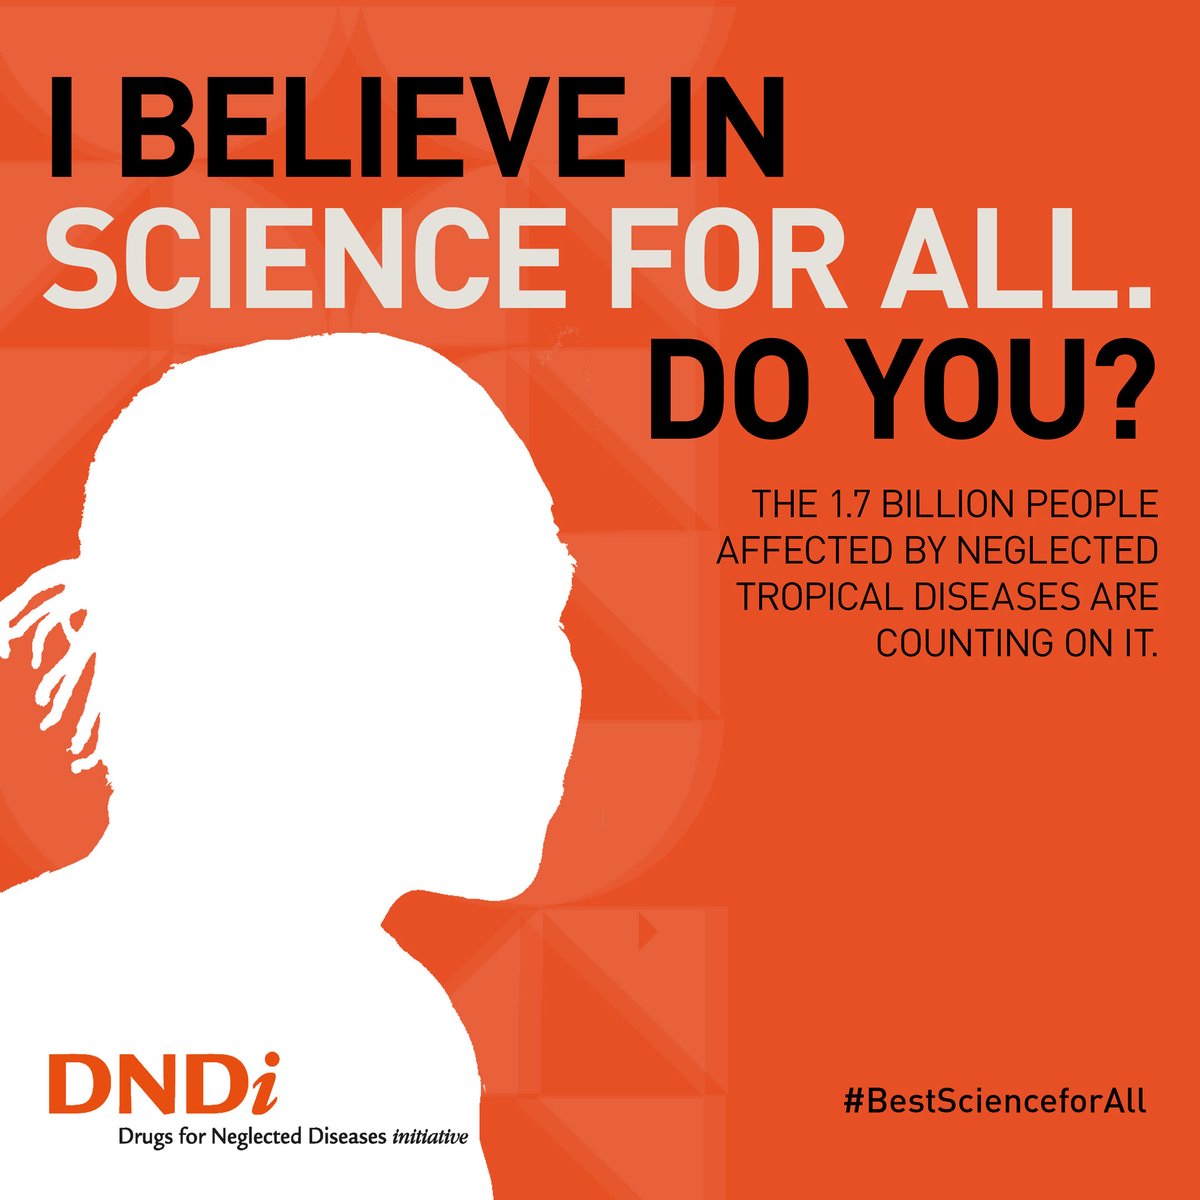 Its frustrating to see the impact of neglected diseases on people. The mental & socio-economic impact is unimaginable!  We have to be ##100percentCommitted to find new tools. Join us on #worldntdday to spread the word #bestscienceforall  #beatntds